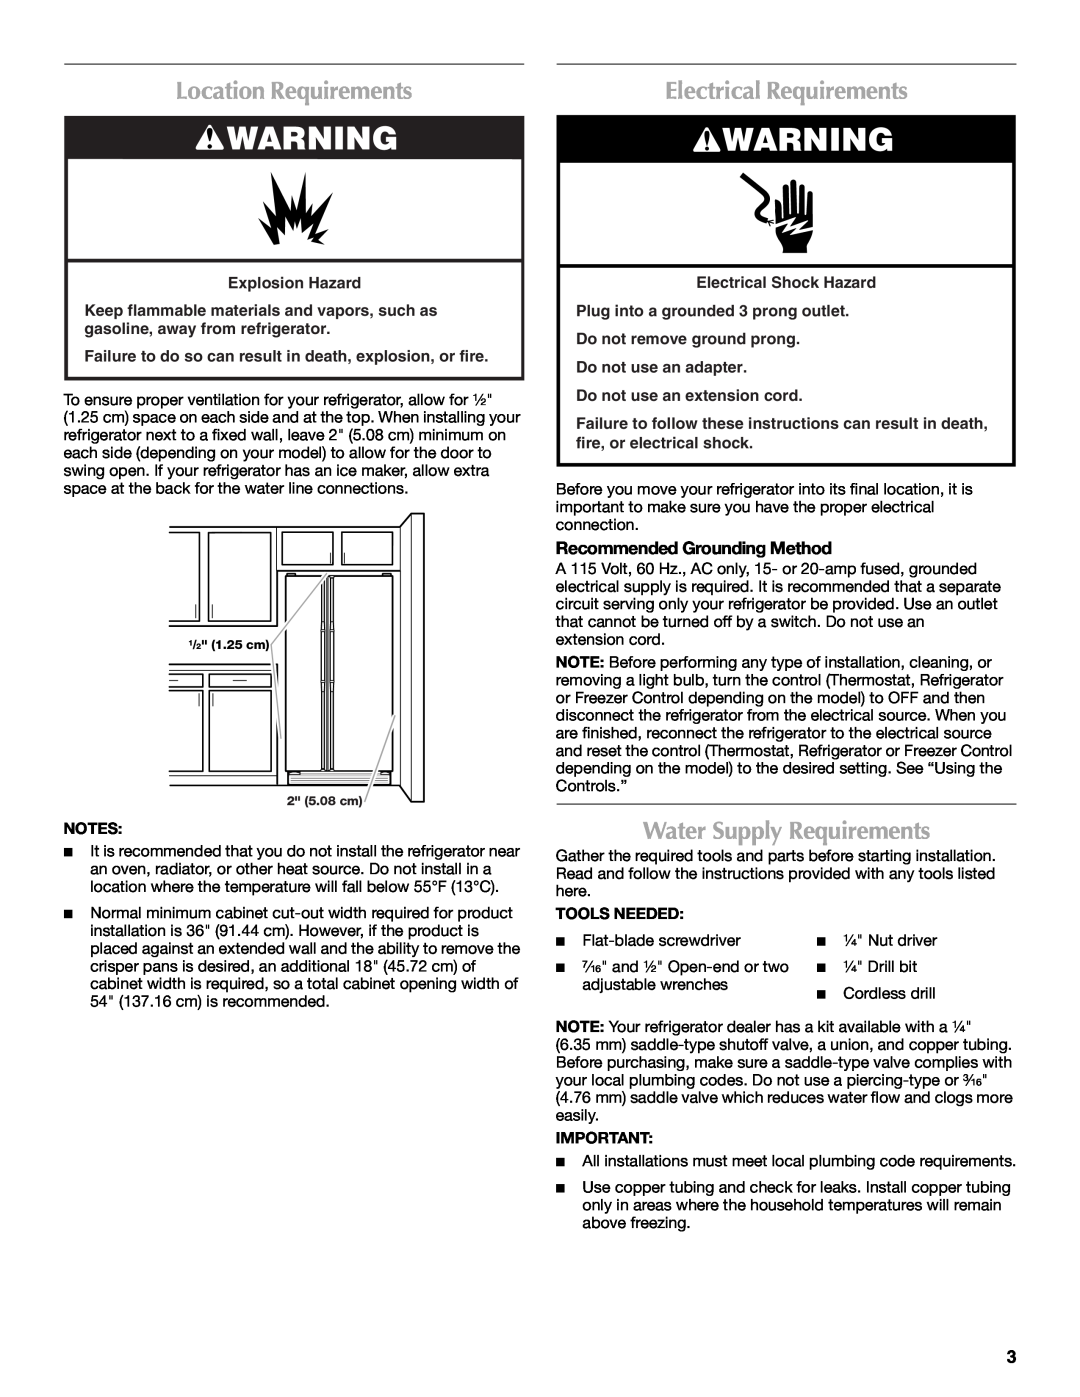 Maytag W10213157A Location Requirements, Electrical Requirements, Water Supply Requirements, Recommended Grounding Method 